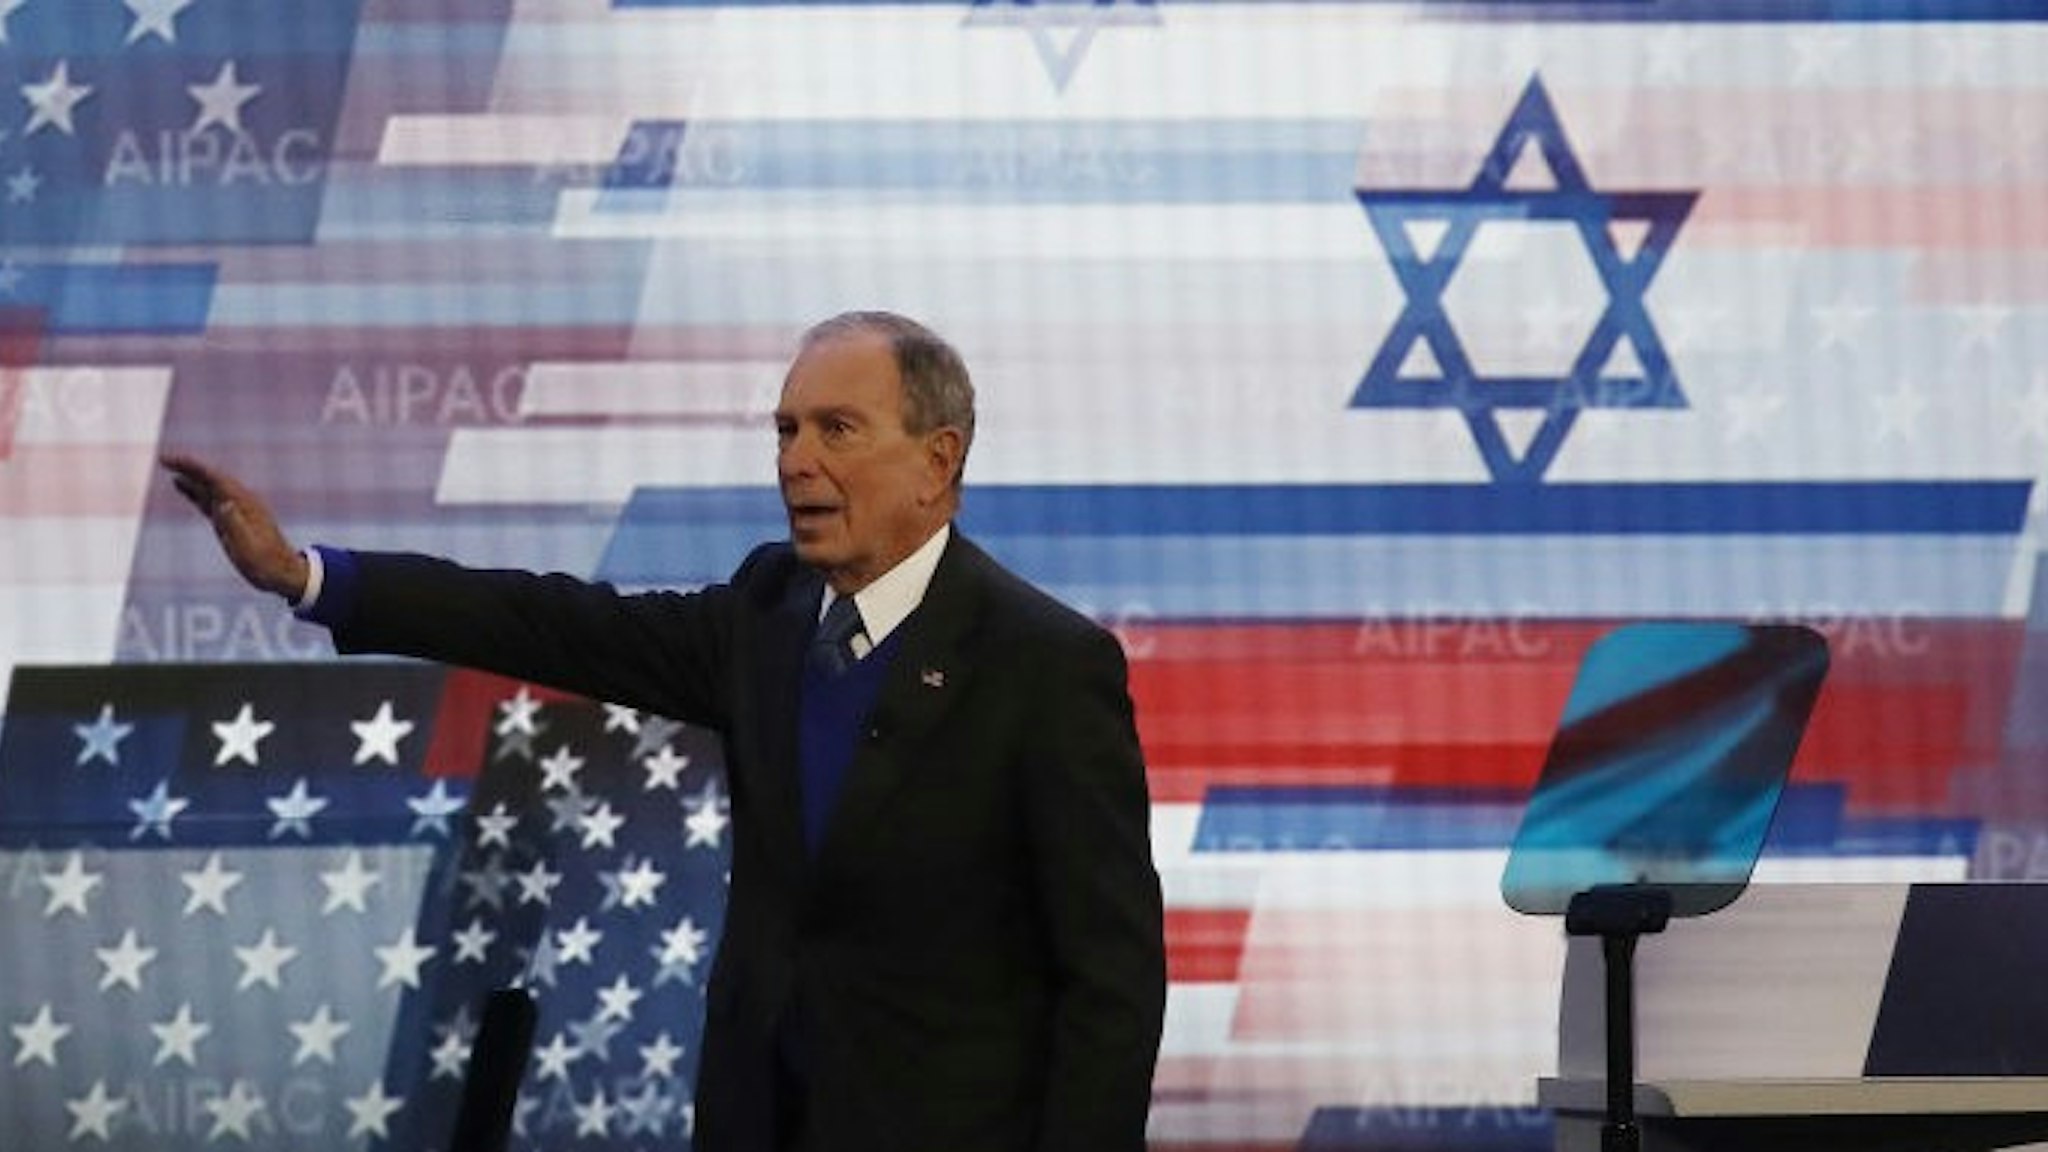 WASHINGTON, DC - MARCH 02: Democratic presidential candidate former New York Mayor Michael Bloomberg speaks during the American Israel Public Affairs Committee (AIPAC) policy conference, on March 2, 2020 in Washington, DC. AIPAC is the lobbying group that advocates pro-Israel policies in the U.S. (Photo by